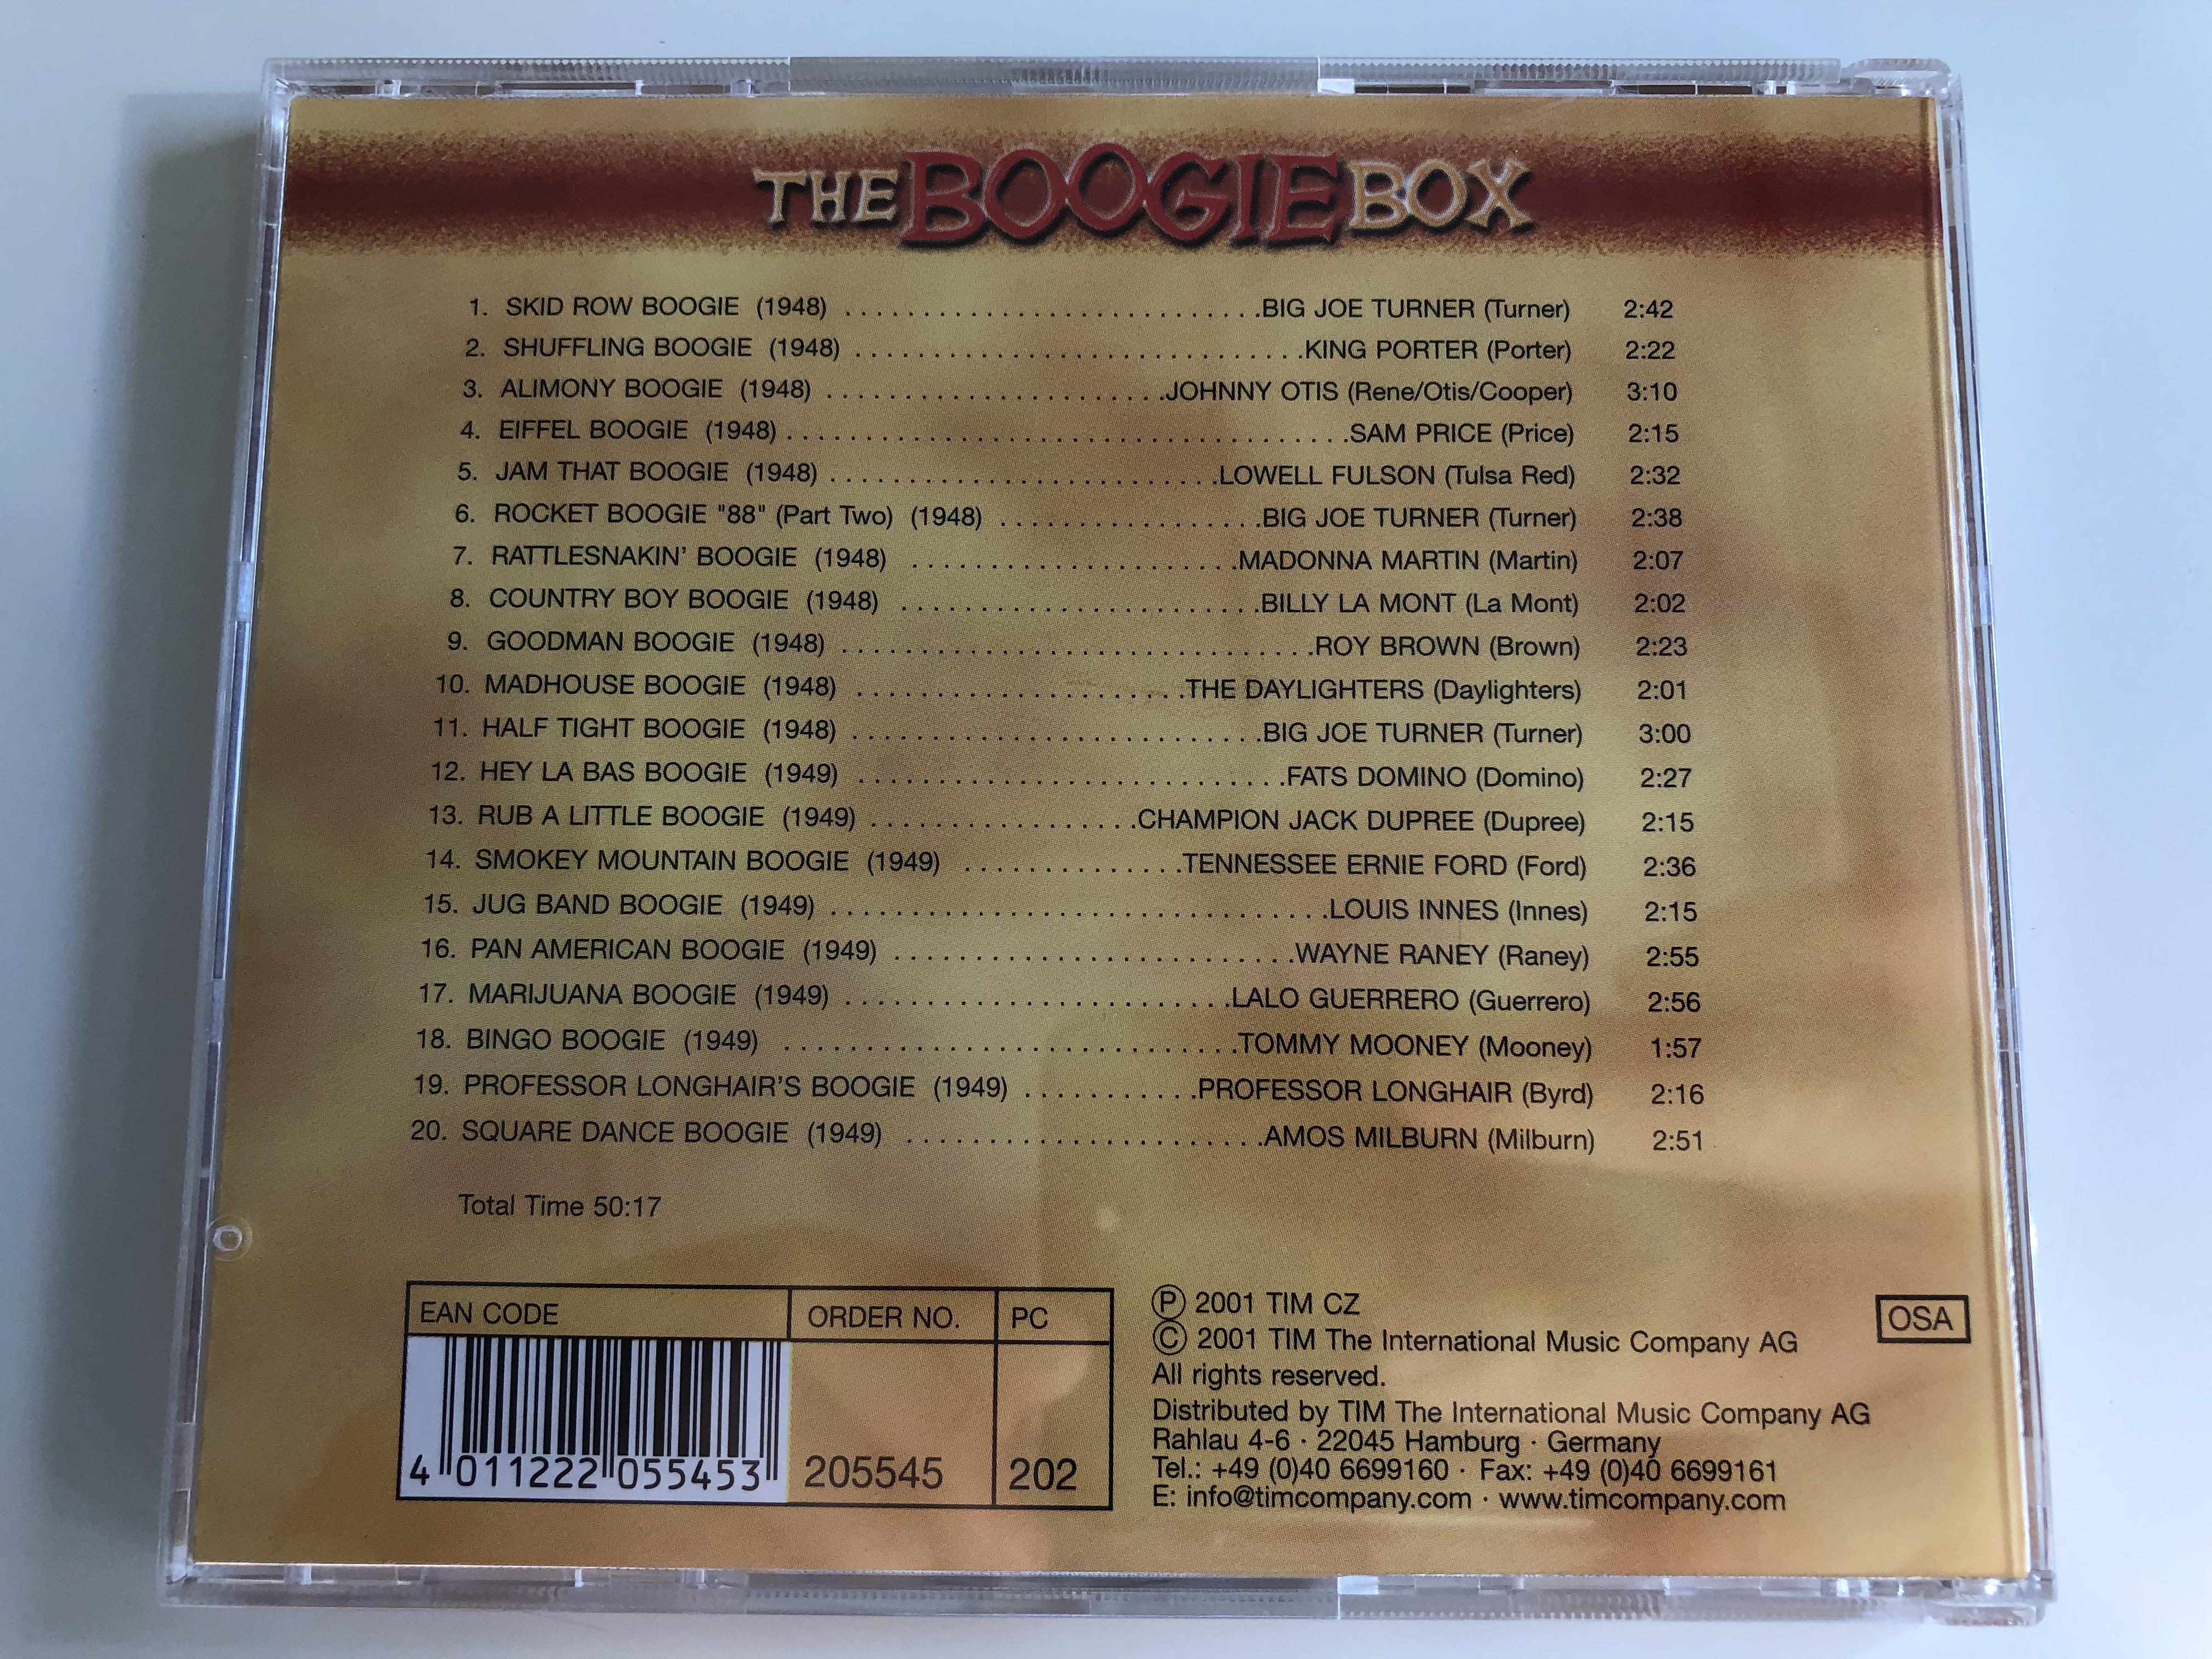 the-boogie-box-vol.-10-big-joe-turner-king-porter-roy-brown-johnny-otis-madonna-martin-billy-la-mont-the-daylighters-fats-domino-louis-innis-lalo-guerrero-tommy-mooney-amos-milburn-and-many-others.jpg